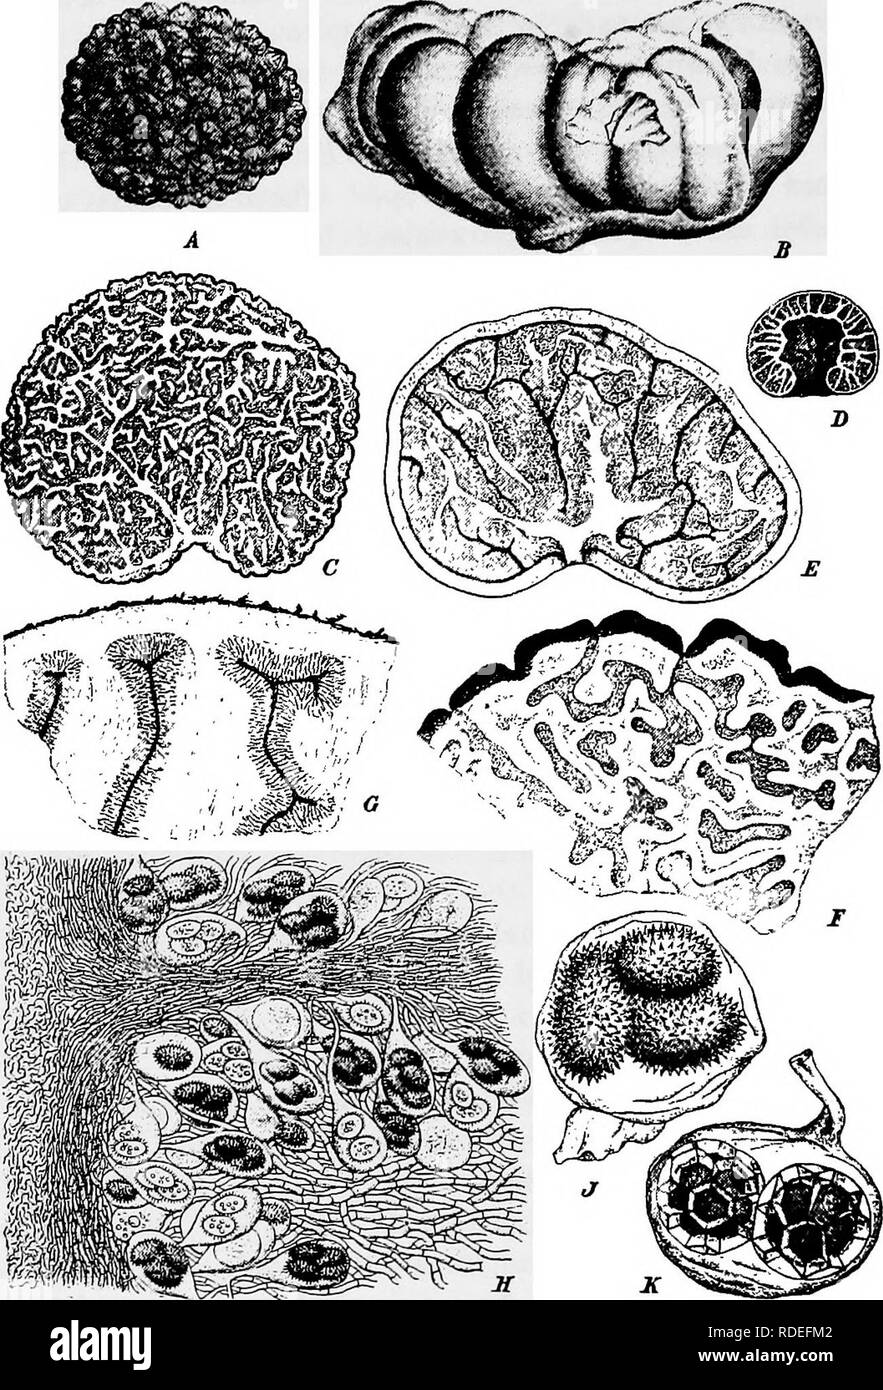 . A text-book of mycology and plant pathology . Plant diseases; Fungi in agriculture; Plant diseases; Fungi. 152 MYCOLOGY. Fig. 52.—A, Tuber cuslhmm fruit-body; B, Tuber magnaium fruit-body; C, Tuber brumalef. melanosporum, section through fruit-body; D, Tuber excavatum, section of fruit-body; E, Tuber astivum f. mesentericum, piece of fruit-body near pcridium en- larged; G, piece of Tuber excavatum enlarged; H, Tuber rufum, fruit-body magnified showing asci and ascospores; J, Tuber brumale, ascia with spores; K, Tuber magnatuni', ascus with spores. {See Die natUrlichcn PJlanzenfamilien I. i,  Stock Photo